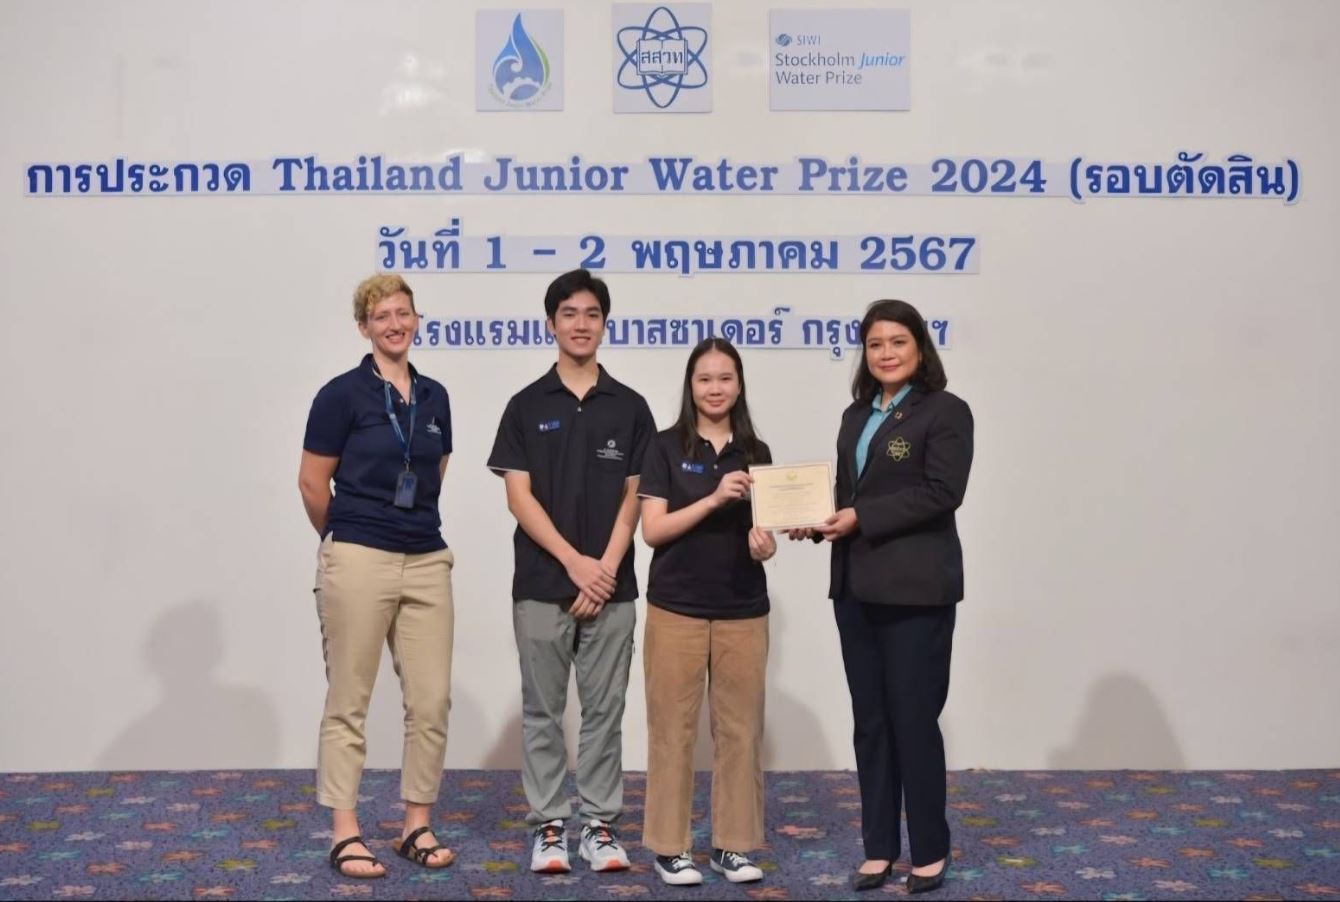 St Andrews Bangkok students shine at Thailand Junior Water Prize 2024 with innovative water management design - Niio Nina Thailand Junior Water Prize